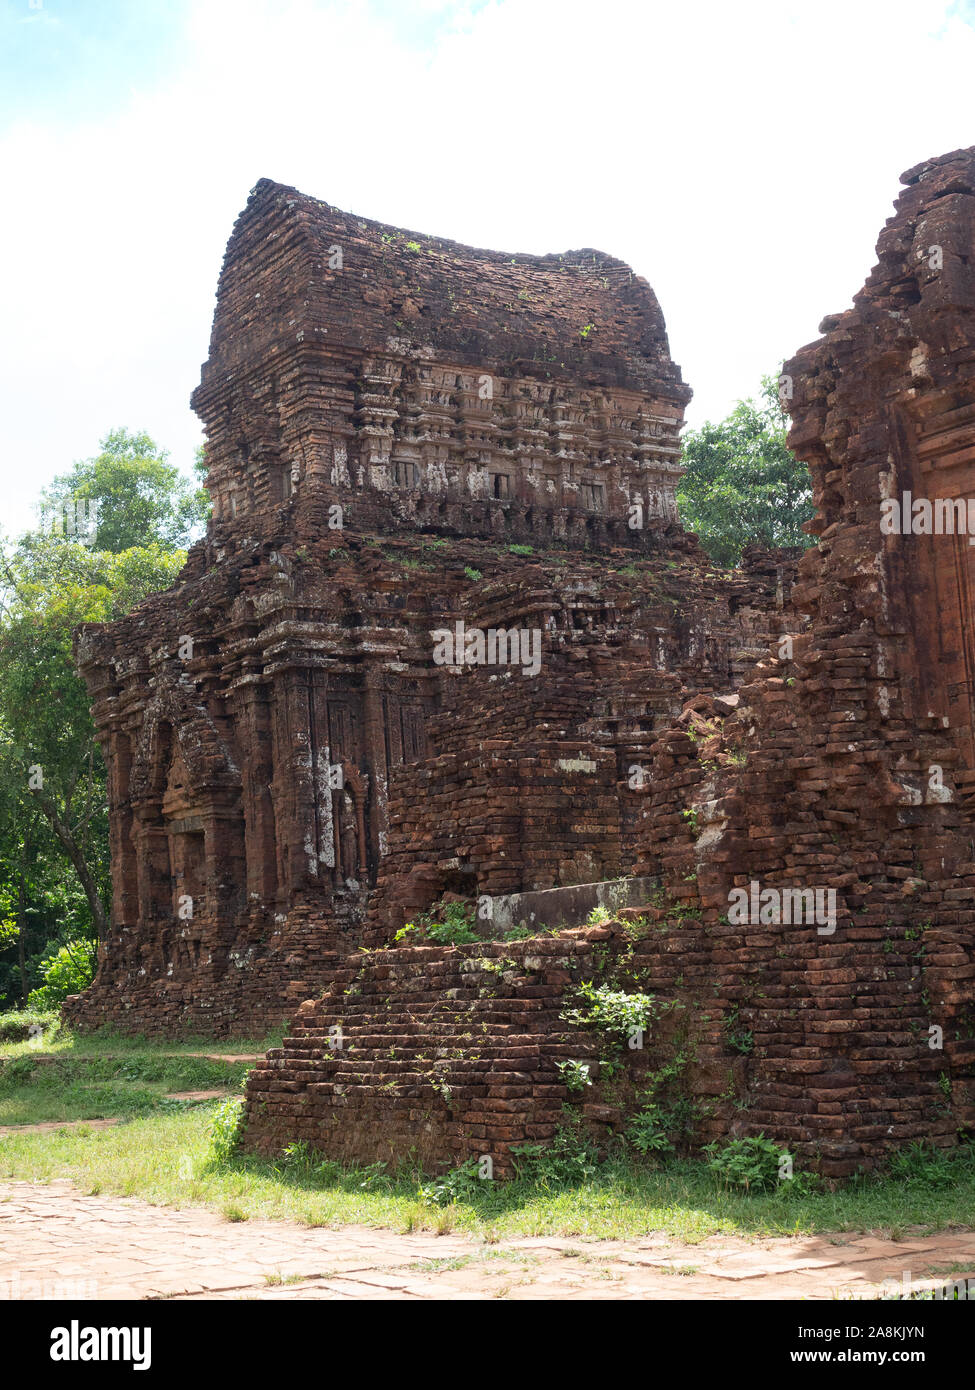 Ancient brown brick buildings with decorative carvings at the ruins of the Champa civilization, a Hindu Temple complex, at My Son, Vietnam. Stock Photo